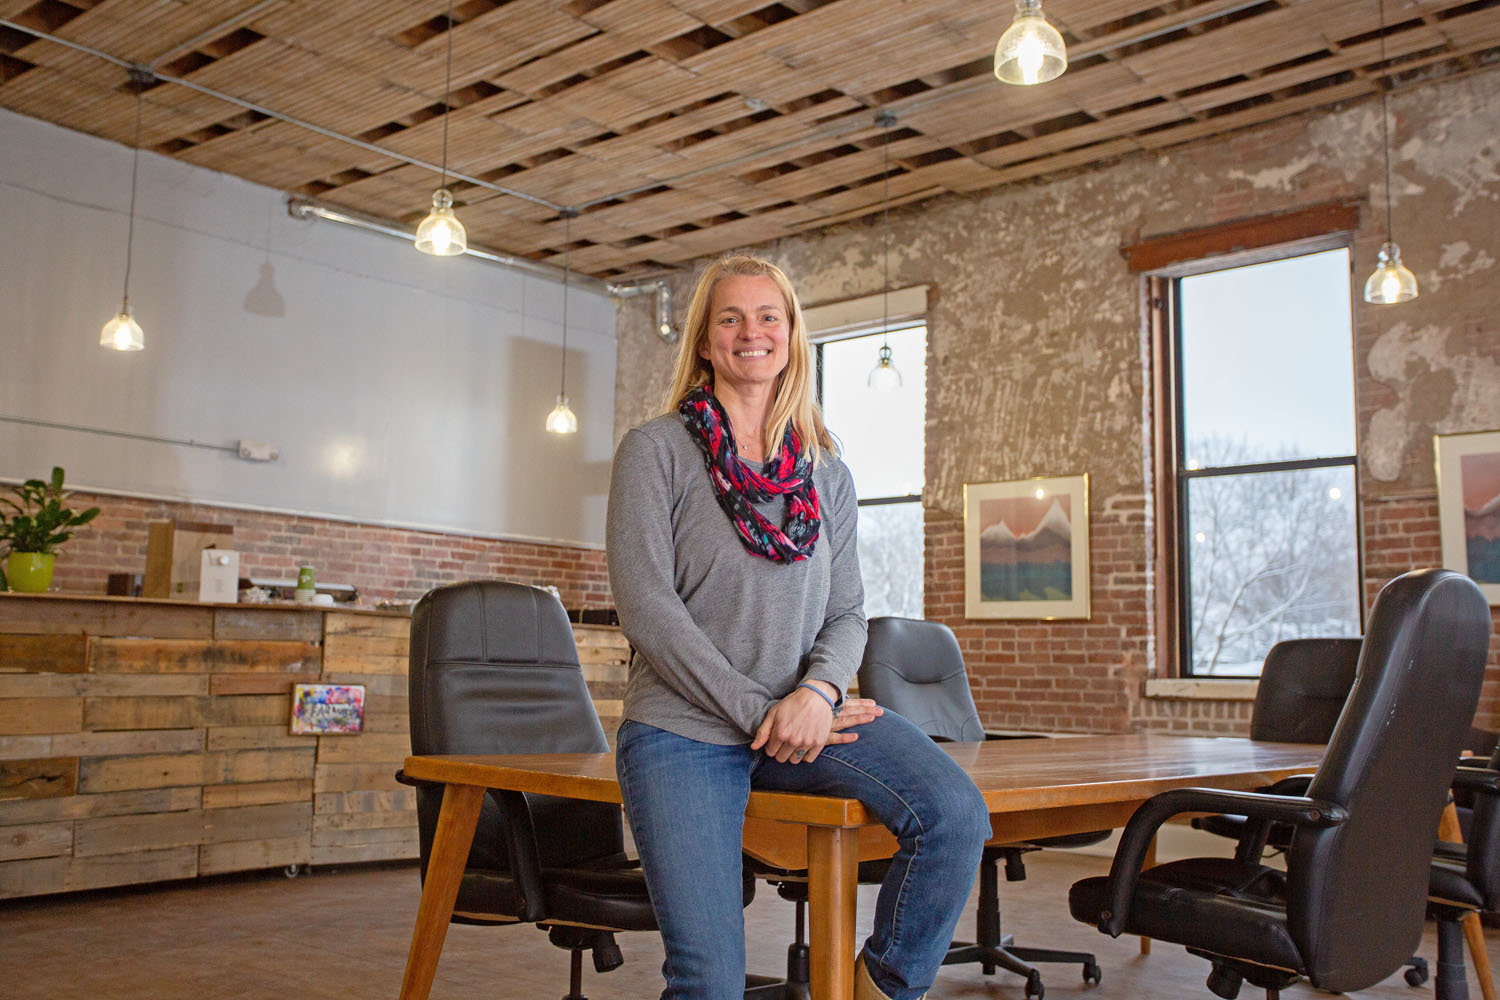 GATHERING SPACE: The Drew Lewis Foundation, led by founder Amy Blansit, is among nonprofit agencies in newly renovated space at The Fairbanks, a former school built in 1906.